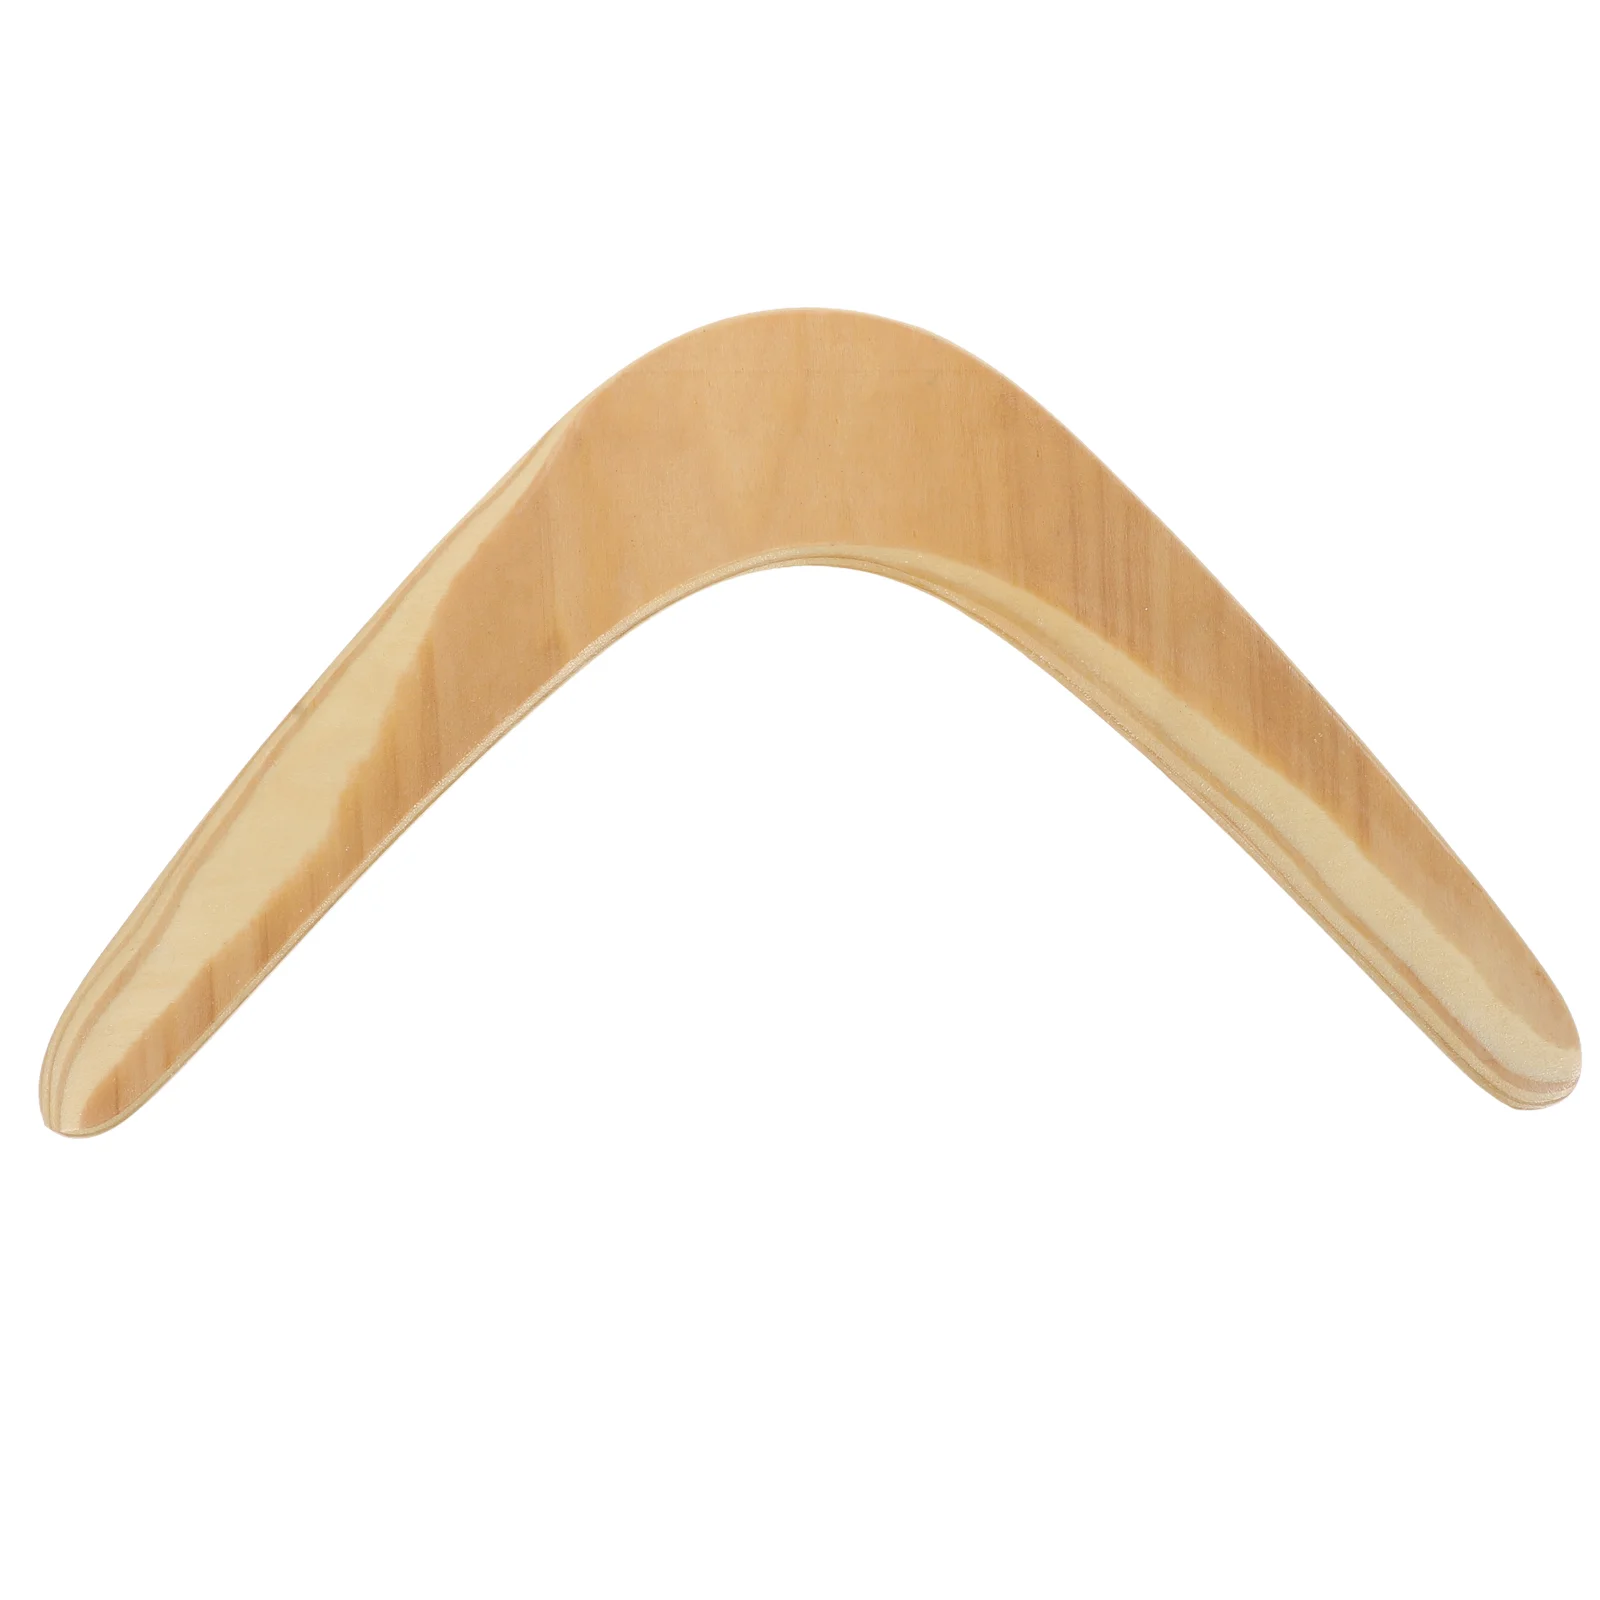 

Boomerang Boomerangs Flying Toy Kids Outdoor Adults Wooden Beginner Returning Funny Wood Catch Toys Maneuver Throwing Dart